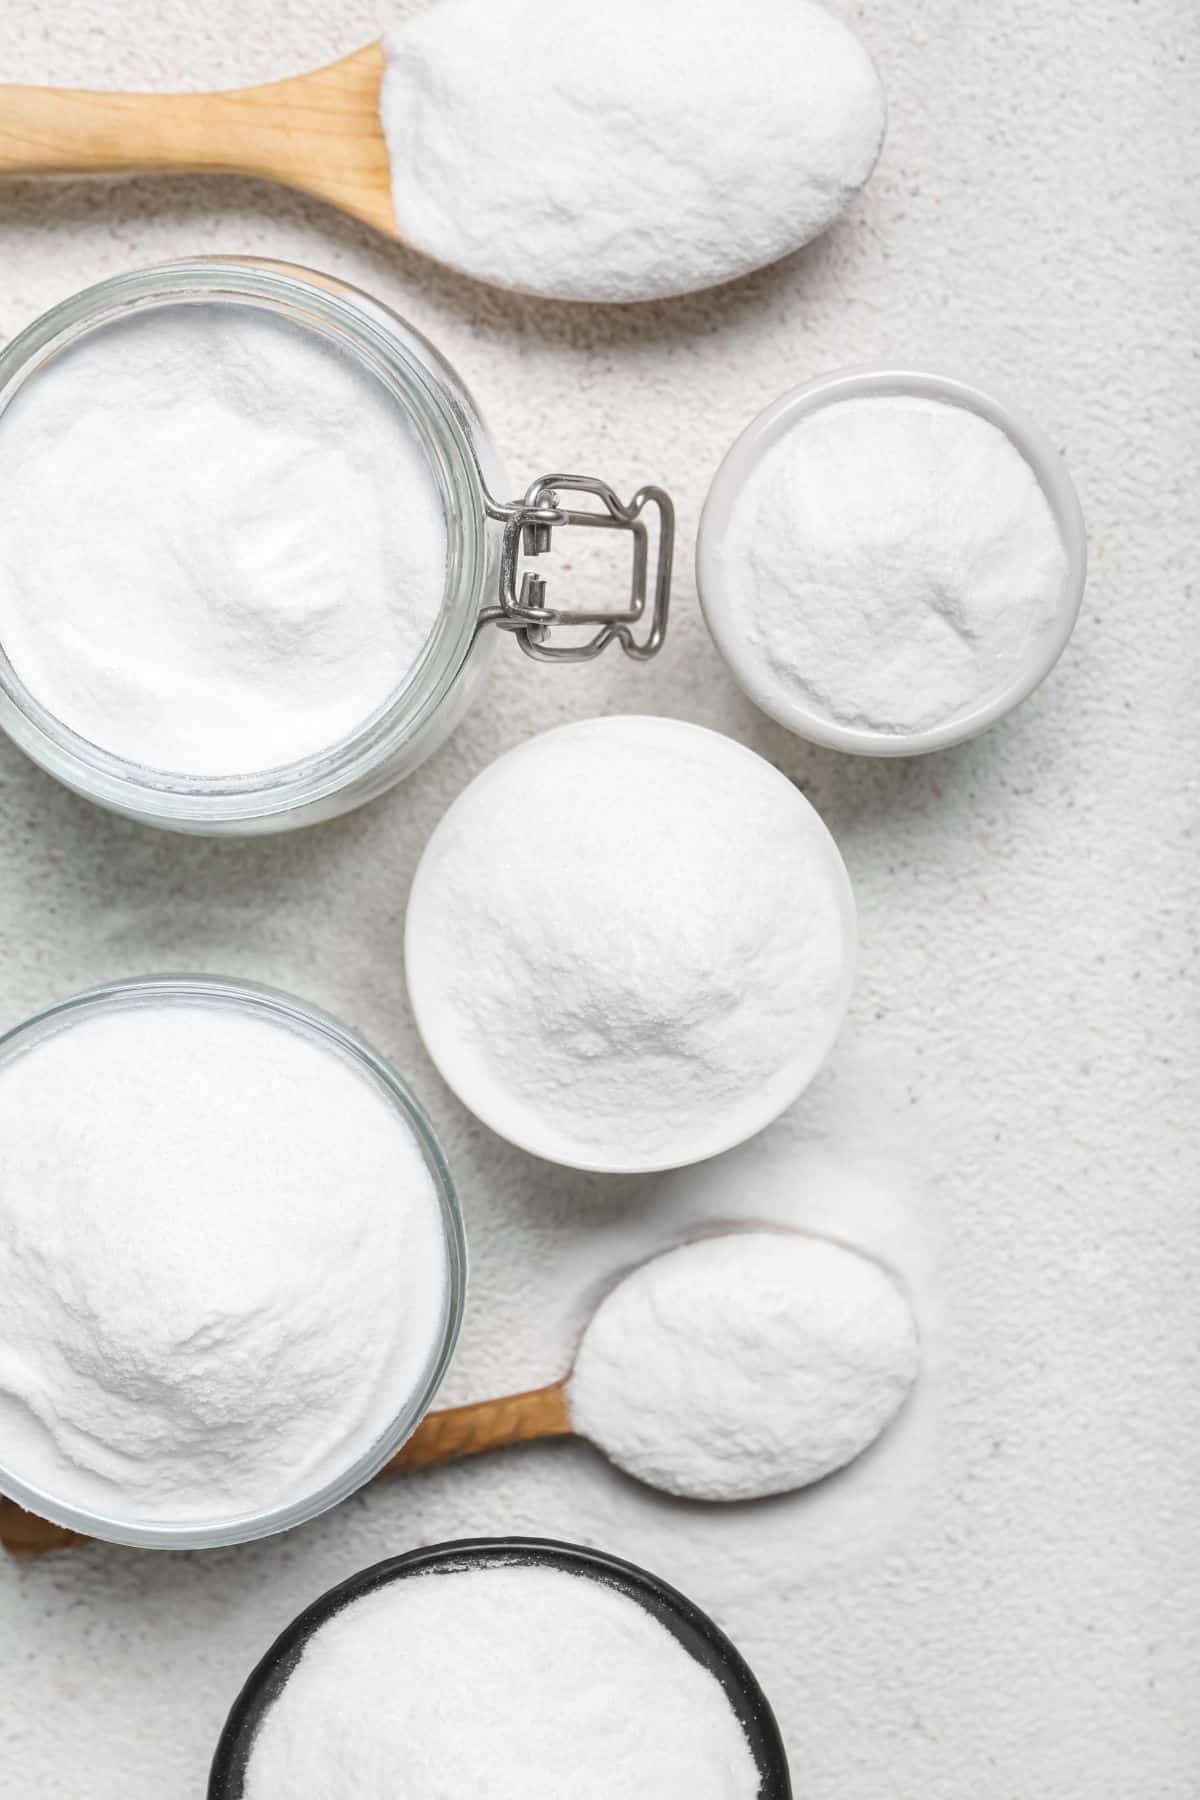 Baking soda is a versatile ingredient commonly used in baking and cooking. However, what happens if you run out of baking soda and need a substitute? Don't worry, there are several clever alternatives that you can use to achieve similar results! Whether you're in the middle of baking cookies or trying to clean your kitchen, these substitutes will come to your rescue.